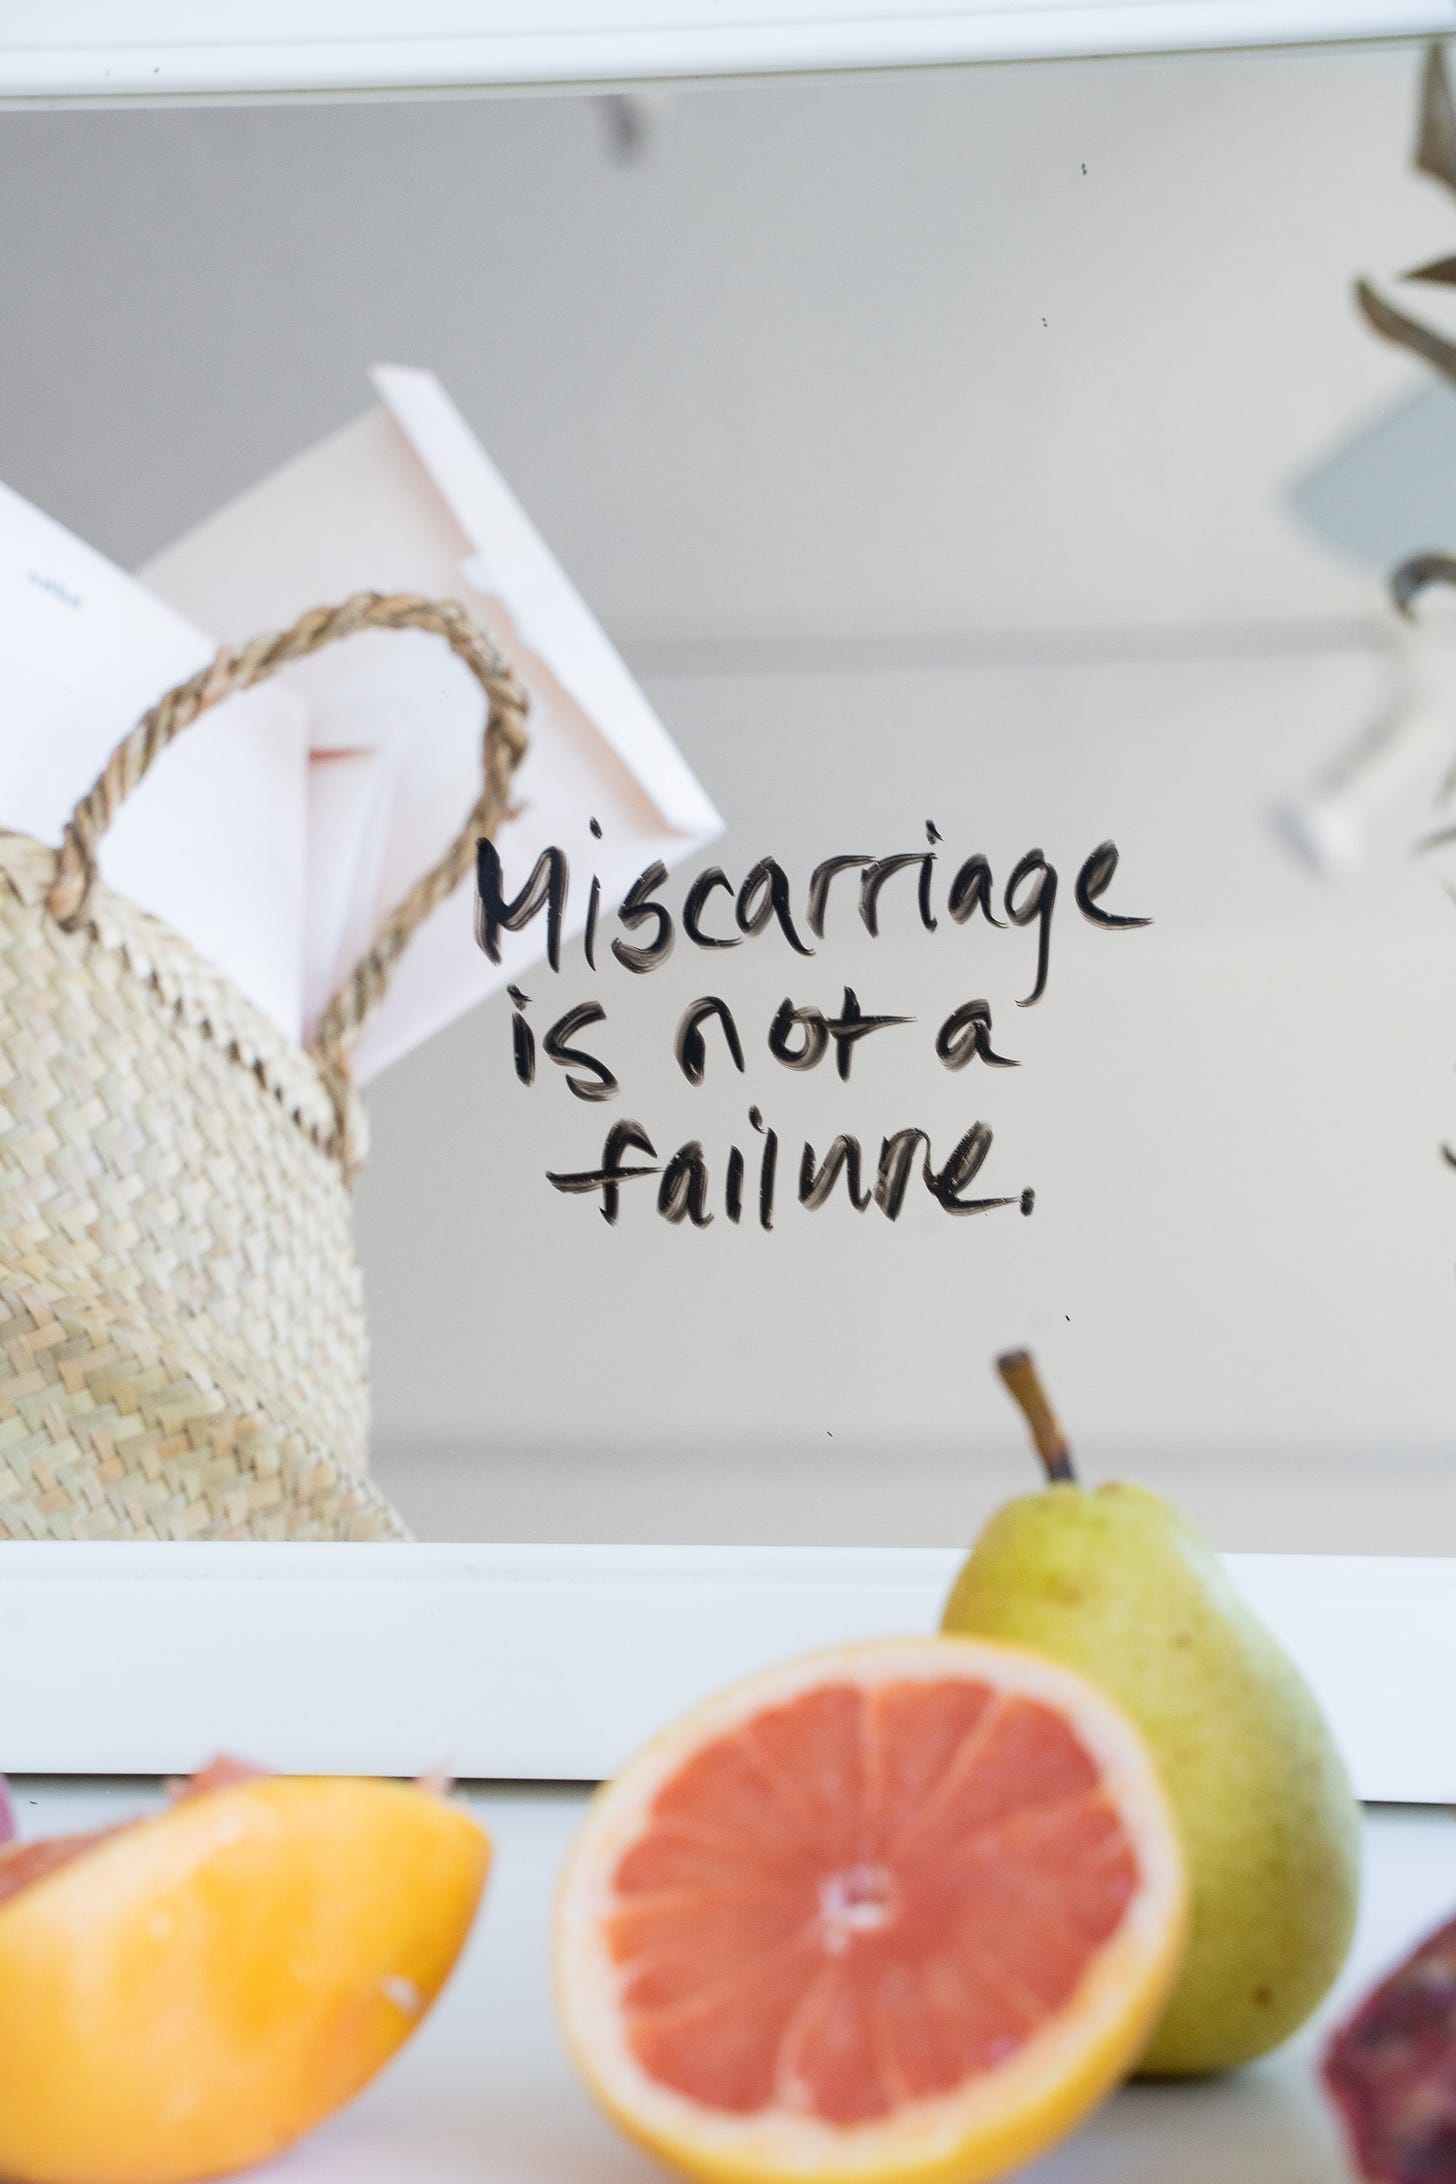 half grapefruit and a pear on a counter top with the words "Miscarriage is not a failure" written over top